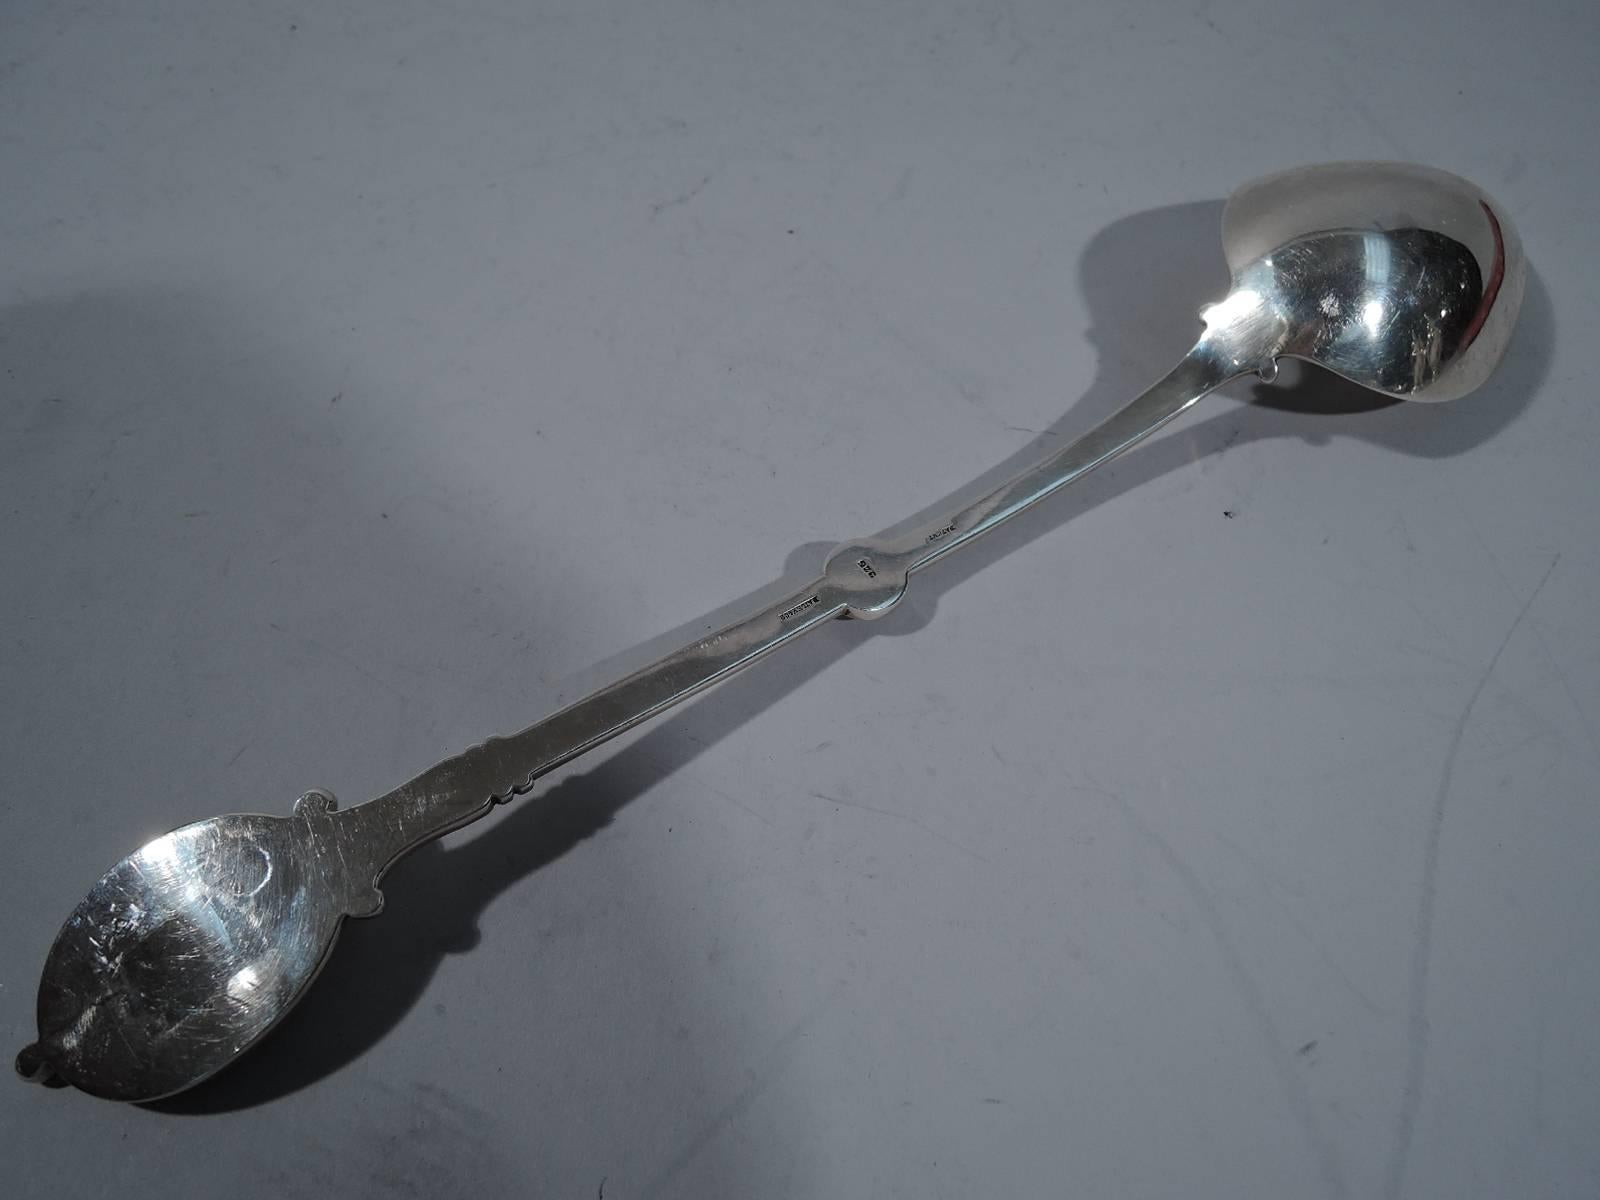 Sterling silver stuffing spoon in medallion pattern. Made by Bailey & Co. (predecessor to Bailey, Banks & Biddle) in Philadelphia, circa 1870. Curved handle terminating in oval medallion applied with Centurion’s head on engraved linear ground. A